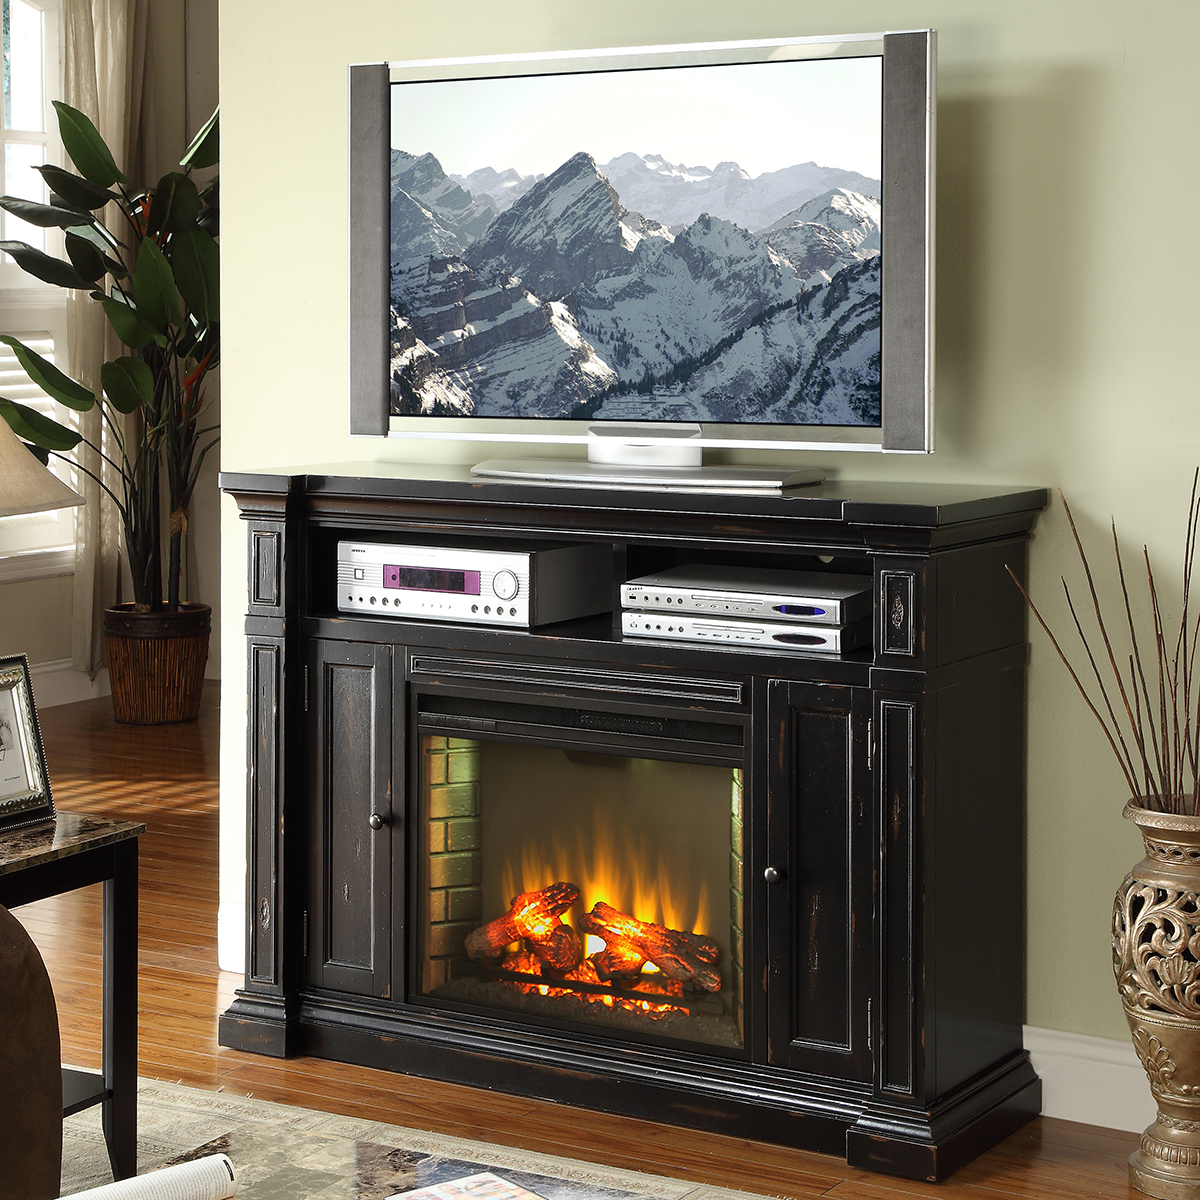 55 Inch Electric Fireplace Unique Manchester 58" Fireplace Media Center Tv Stand Mantel In